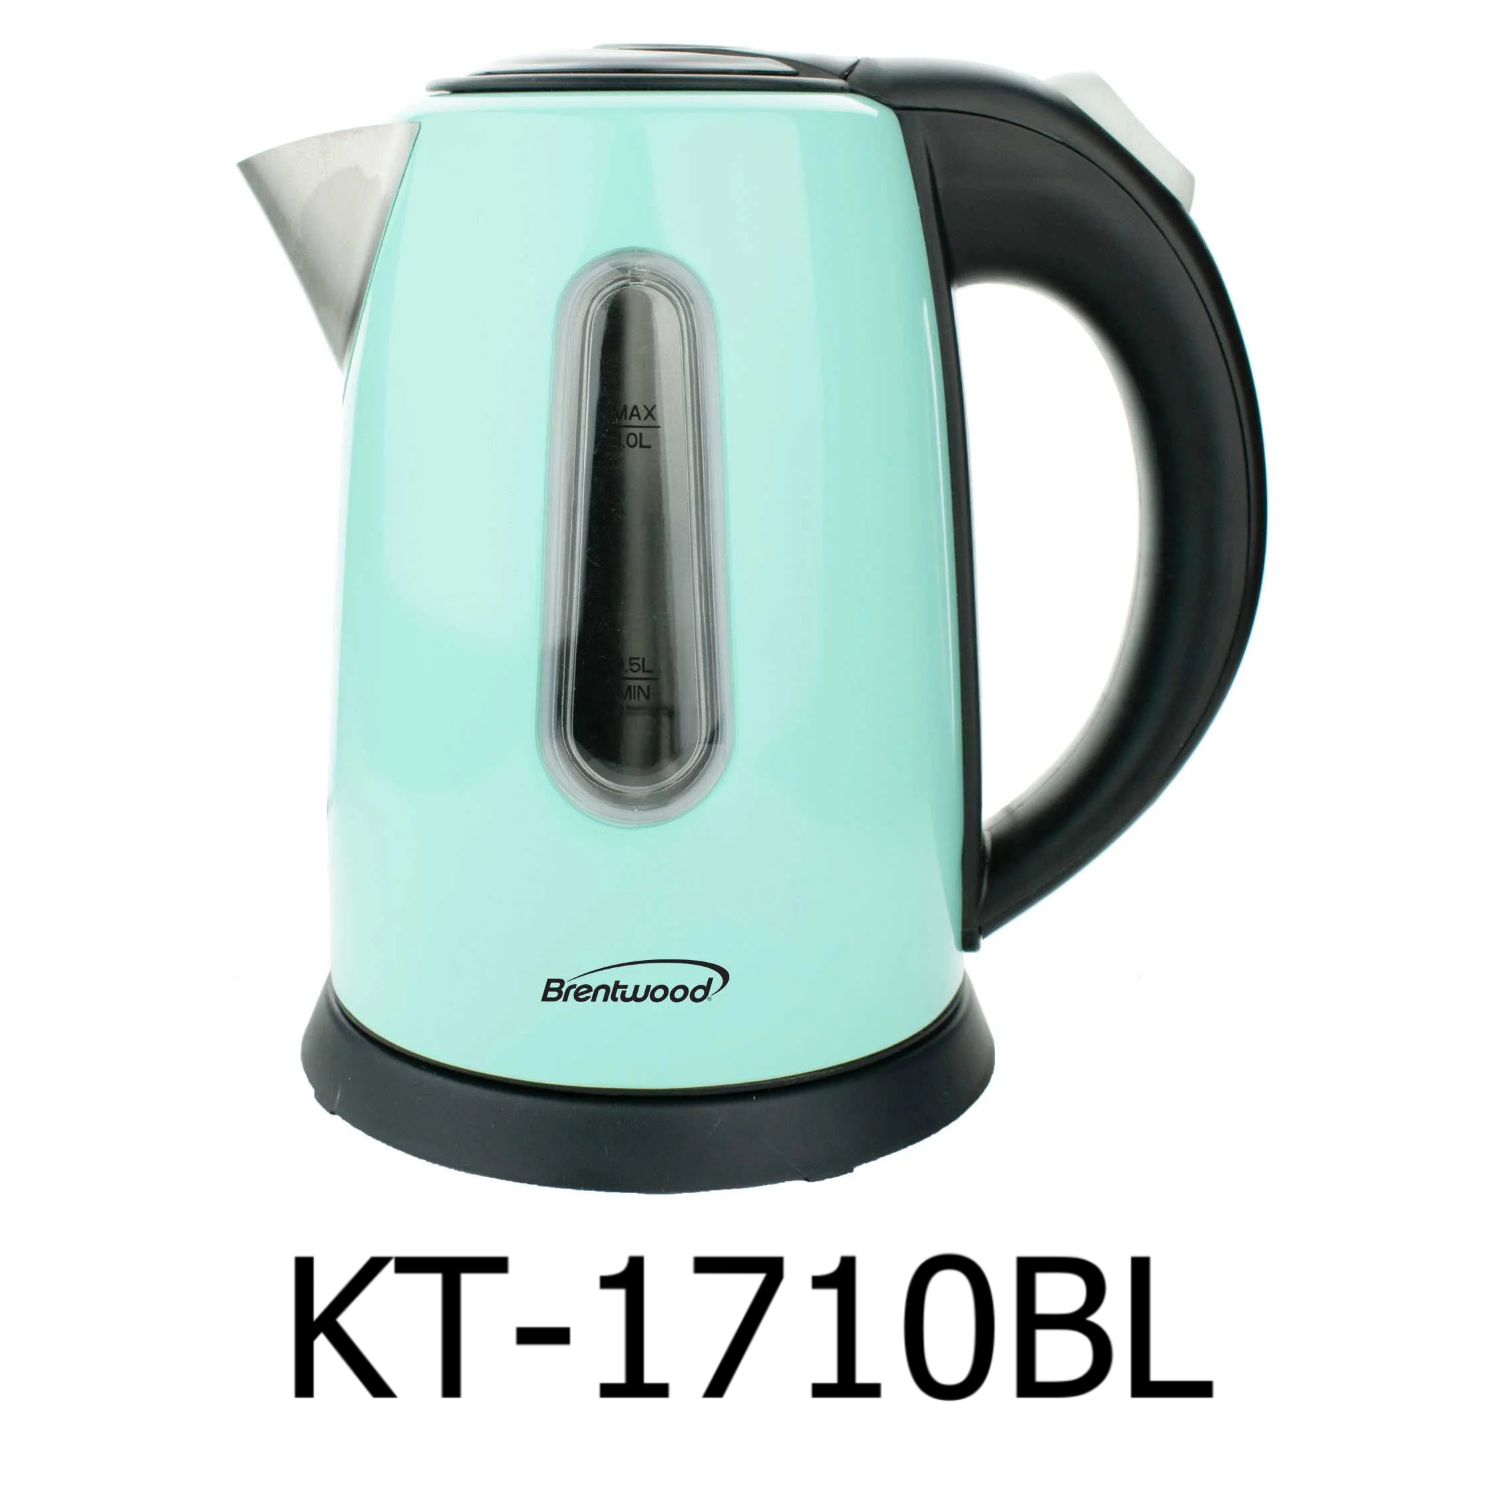 Cordless Electric Water Kettle